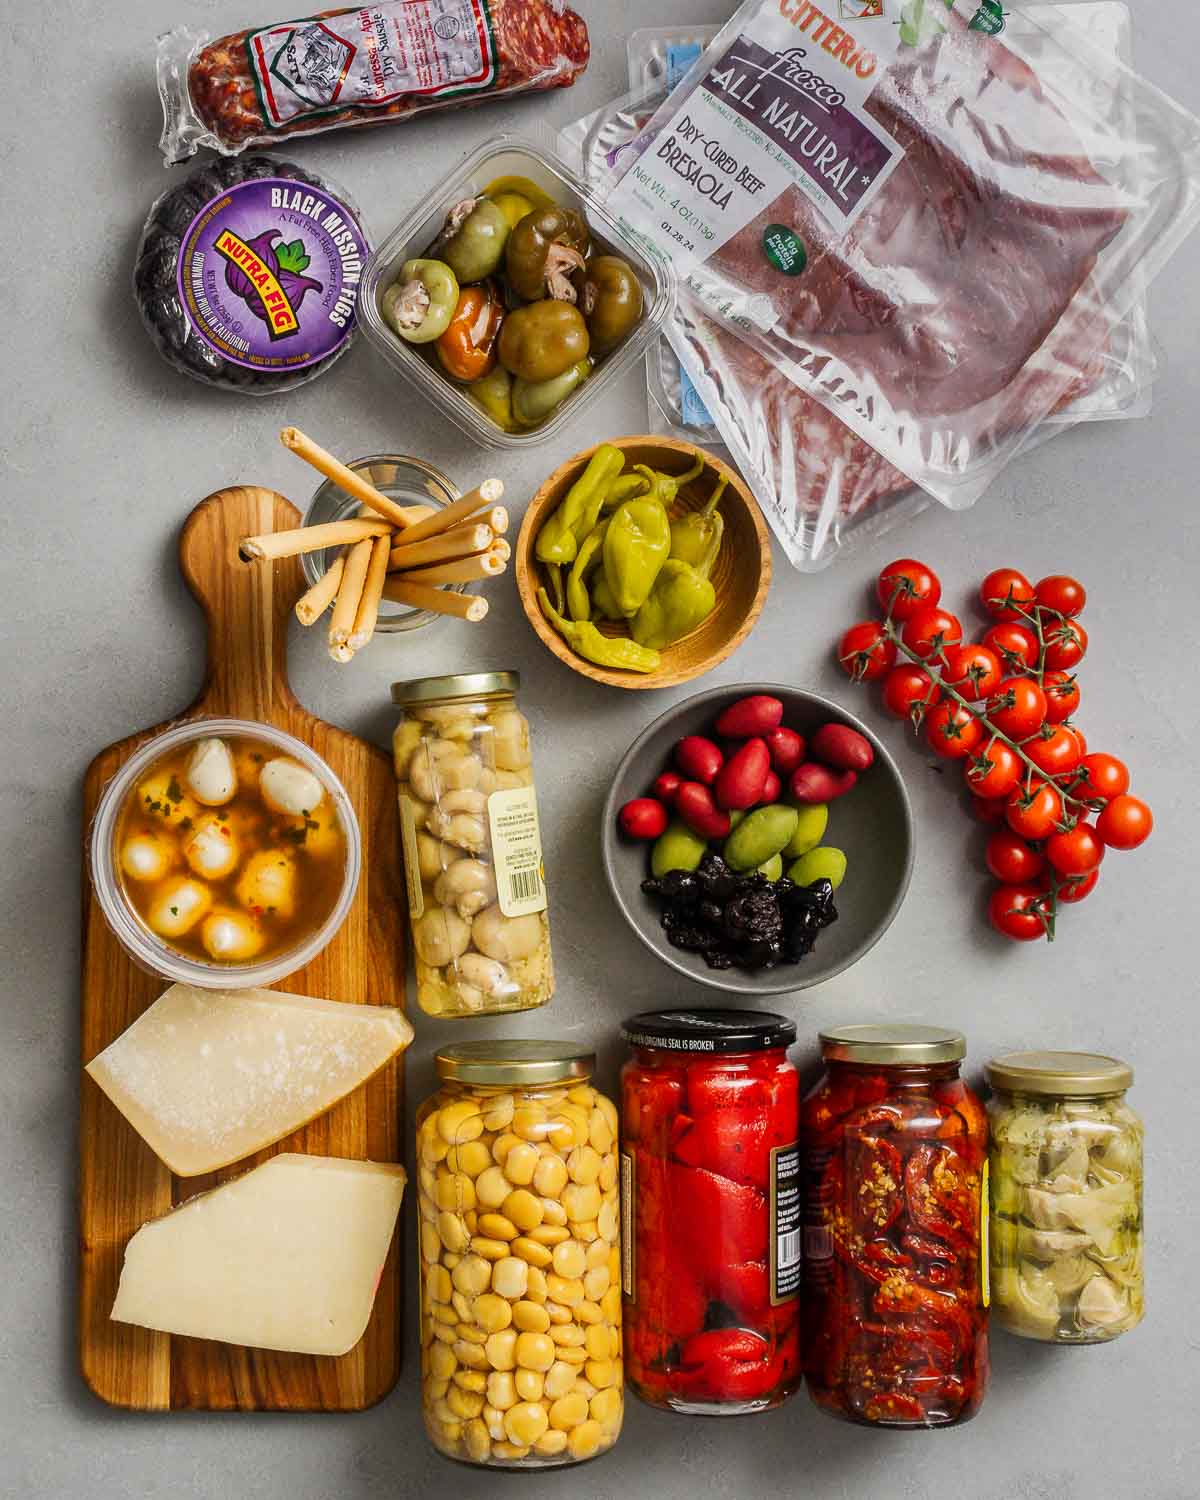 Ingredients shown: salami, figs, stuffed cherry peppers, cured meats, breadsticks, mozzarella balls and assorted cheeses, pickled mushrooms, red roasted peppers, sun-dried tomatoes, artichoke hearts, olives, and cherry tomatoes.